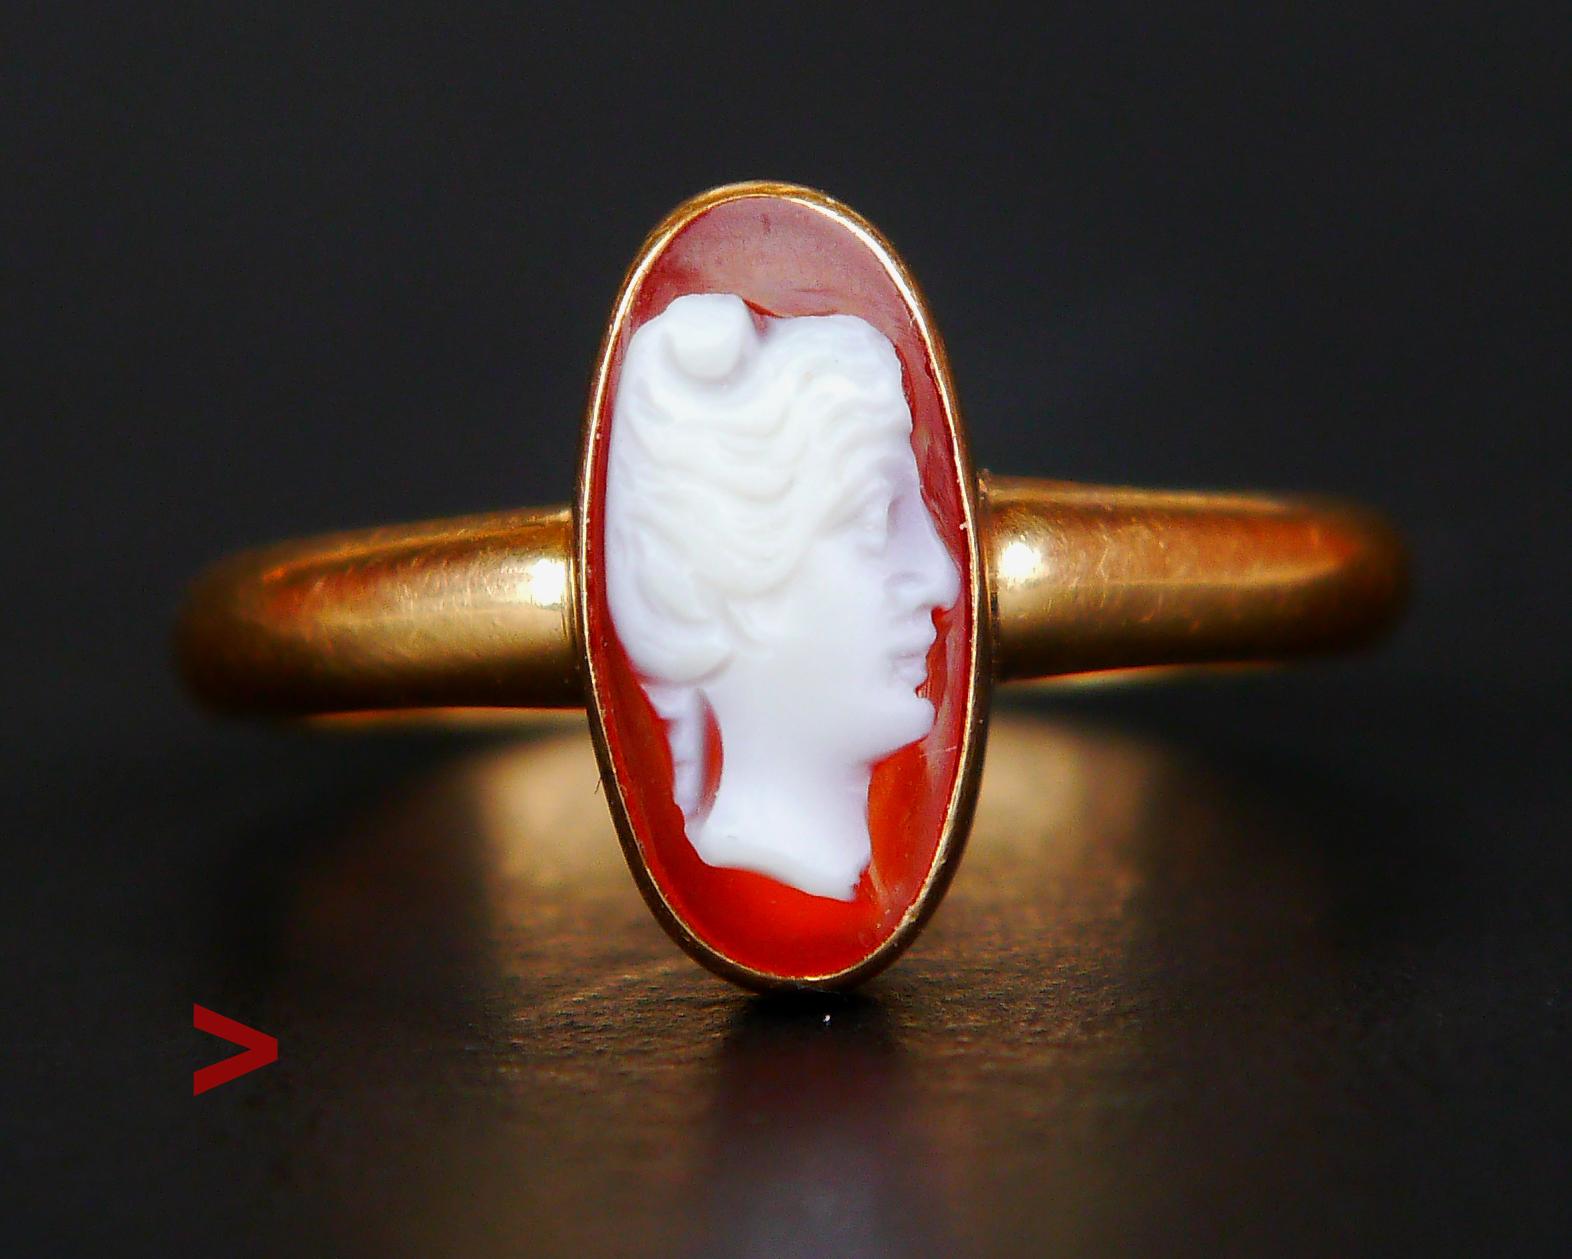 Old Swedish Ring in solid 18K Yellow Gold featuring carved female head cameo skillfully engraved on the surface of Carnelian stone, a variety of  Chalcedony with a layer of white on the surface. Hallmarked 18K &,maker is E. Mandal , Helsinborg, year